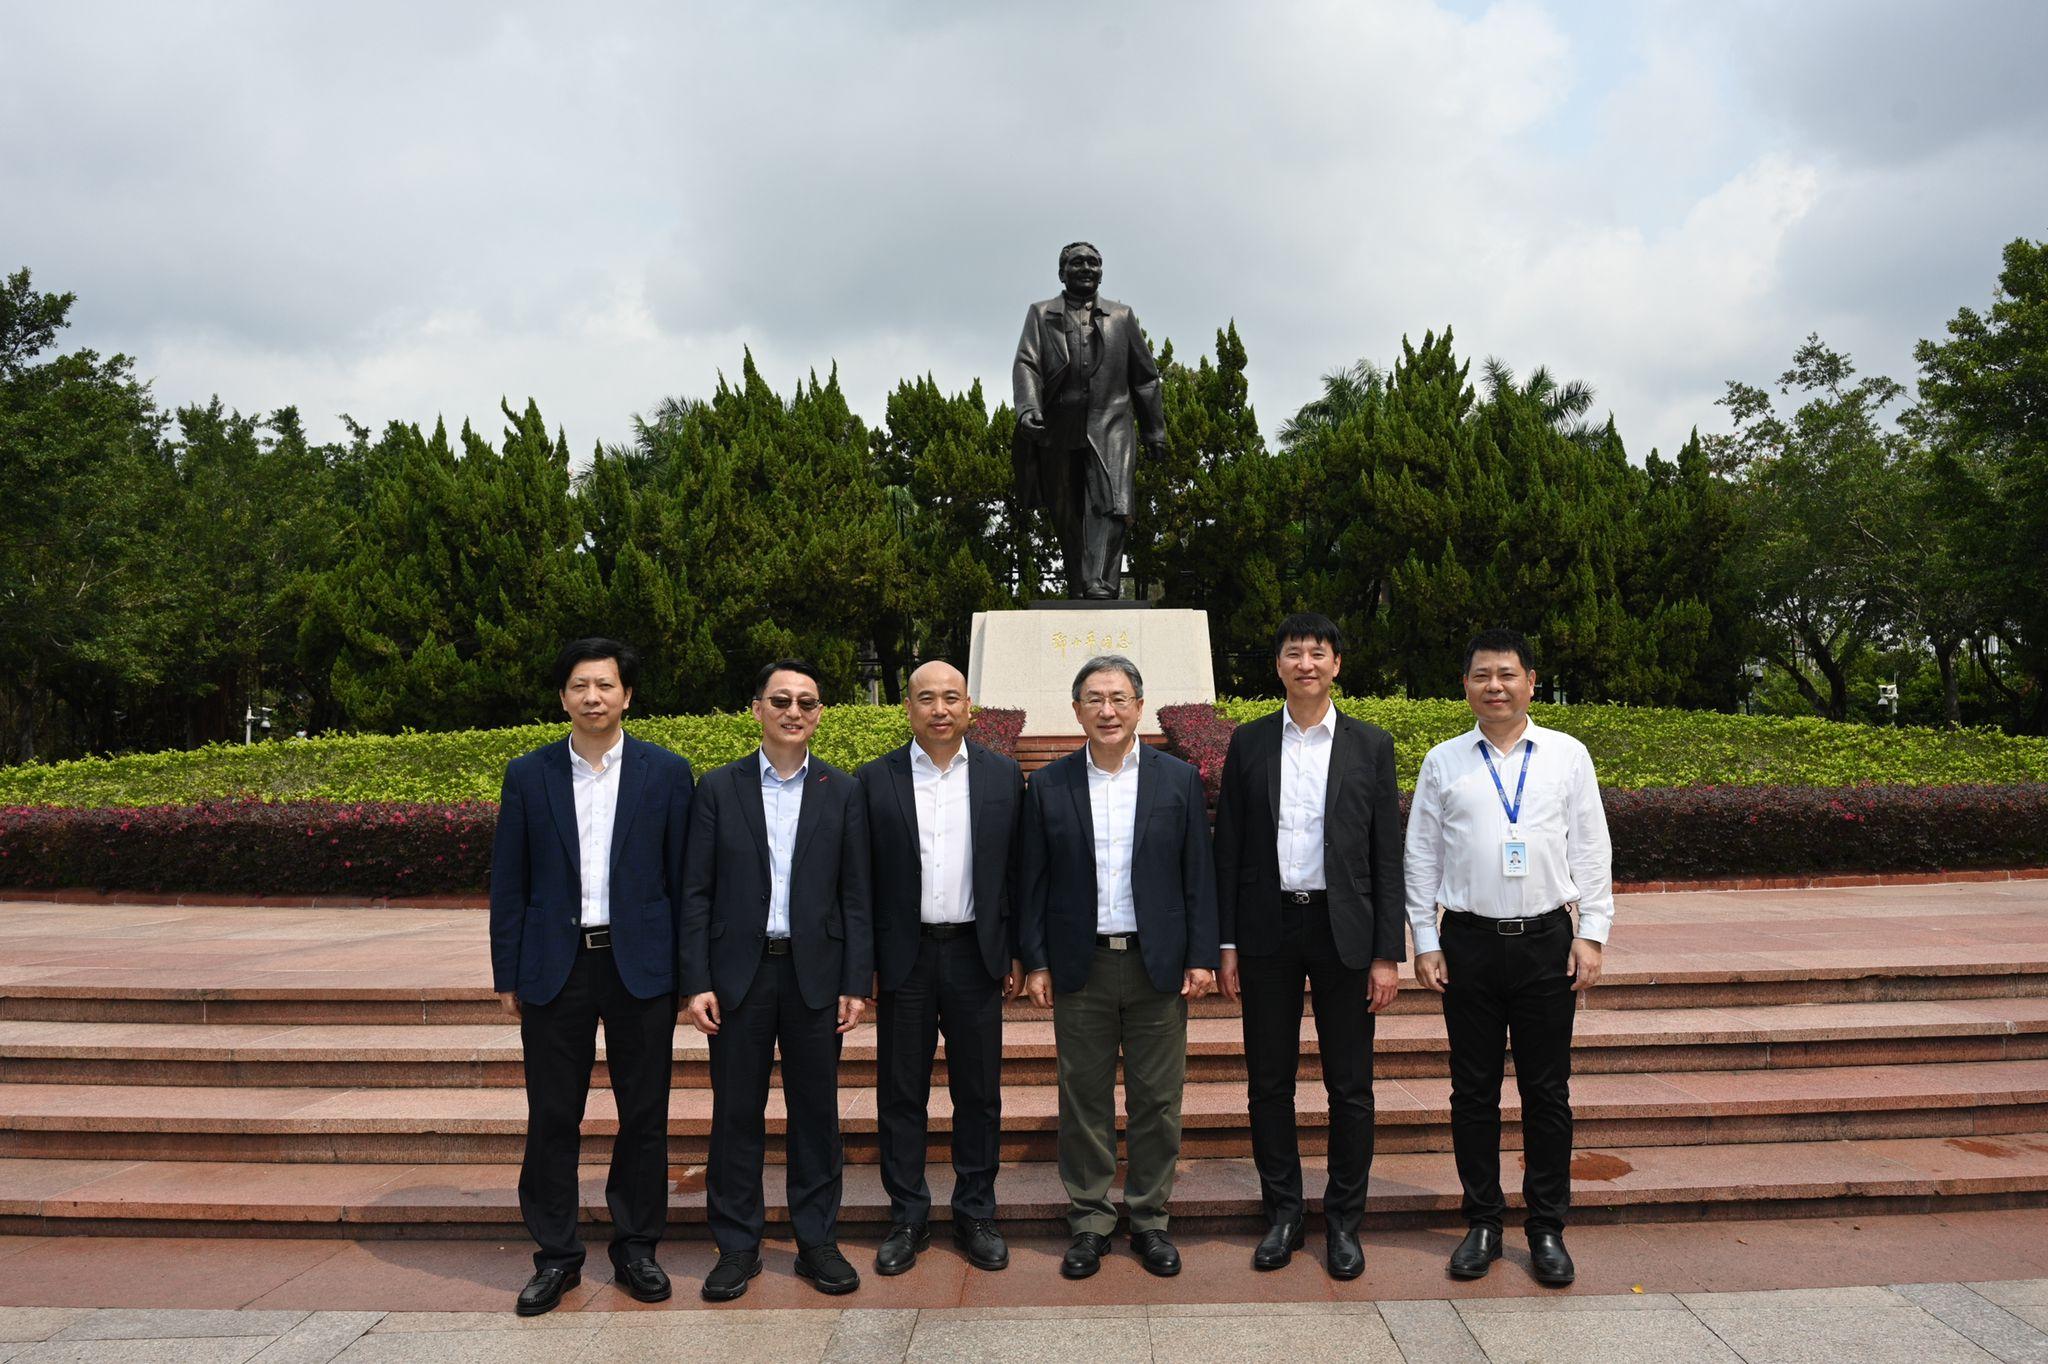 The Deputy Chief Secretary for Administration, Mr Cheuk Wing-hing (third right); the Director of Highways, Mr Jimmy Chan (second right); and the Director of Leisure and Cultural Services, Mr Vincent Liu (second left), are pictured with the Director-General of the Urban Administration and Law Enforcement Bureau of Shenzhen Municipality, Mr Zhang Guohong (third left), and Deputy Director of the Hong Kong and Macao Affairs Office of the Shenzhen Municipal People's Government Mr He Xinhong in front of a bronze statue of Mr Deng Xiaoping at Lianhuashan Park in Shenzhen today (March 23).